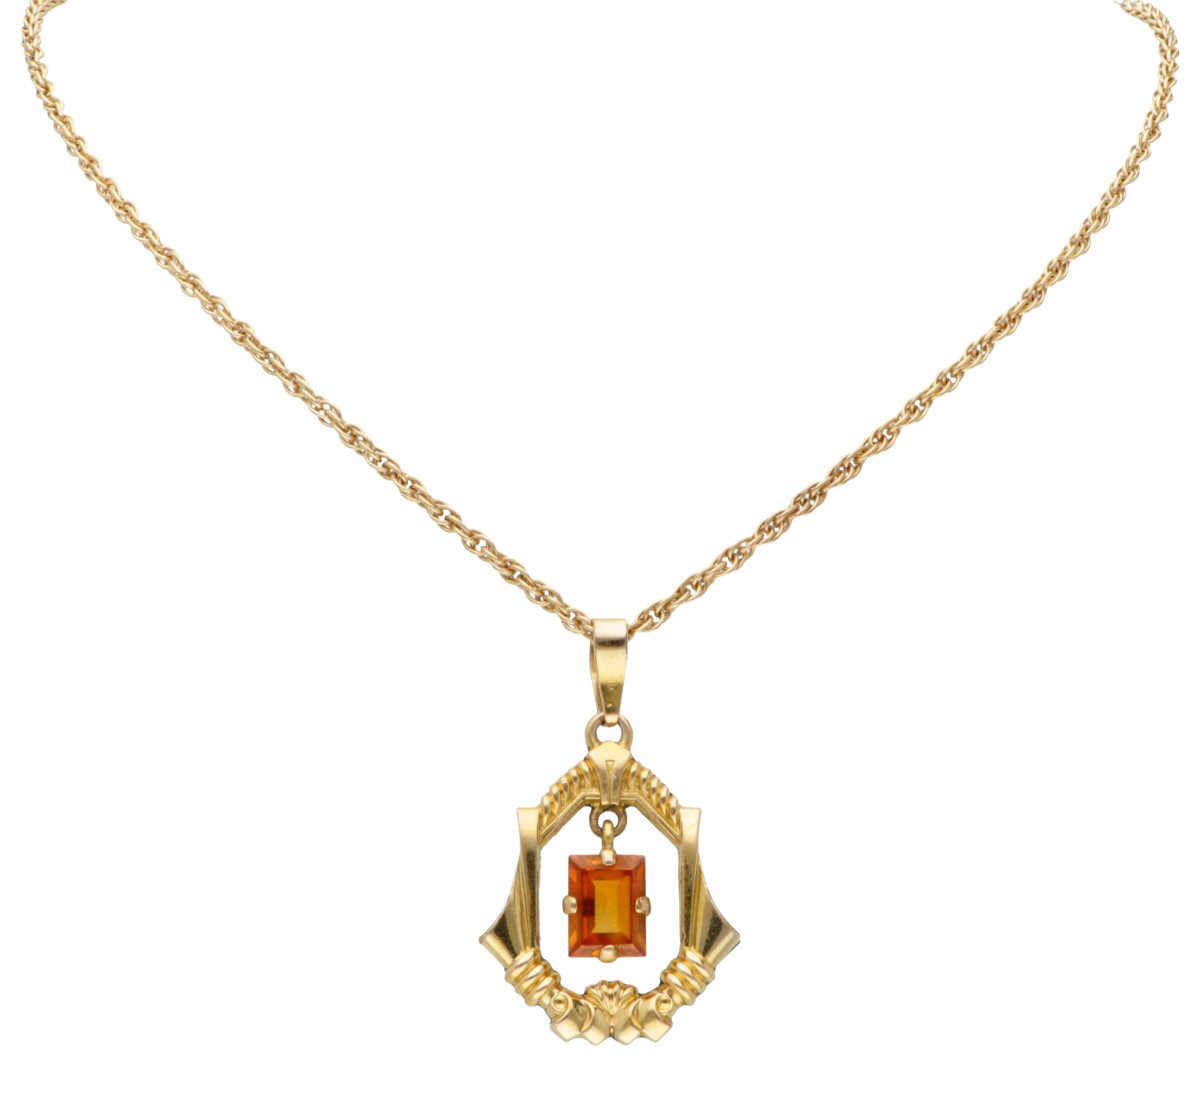 9K. Yellow gold Prince of Wales link necklace with pendant set with approx. 1.00 ct. citrine.